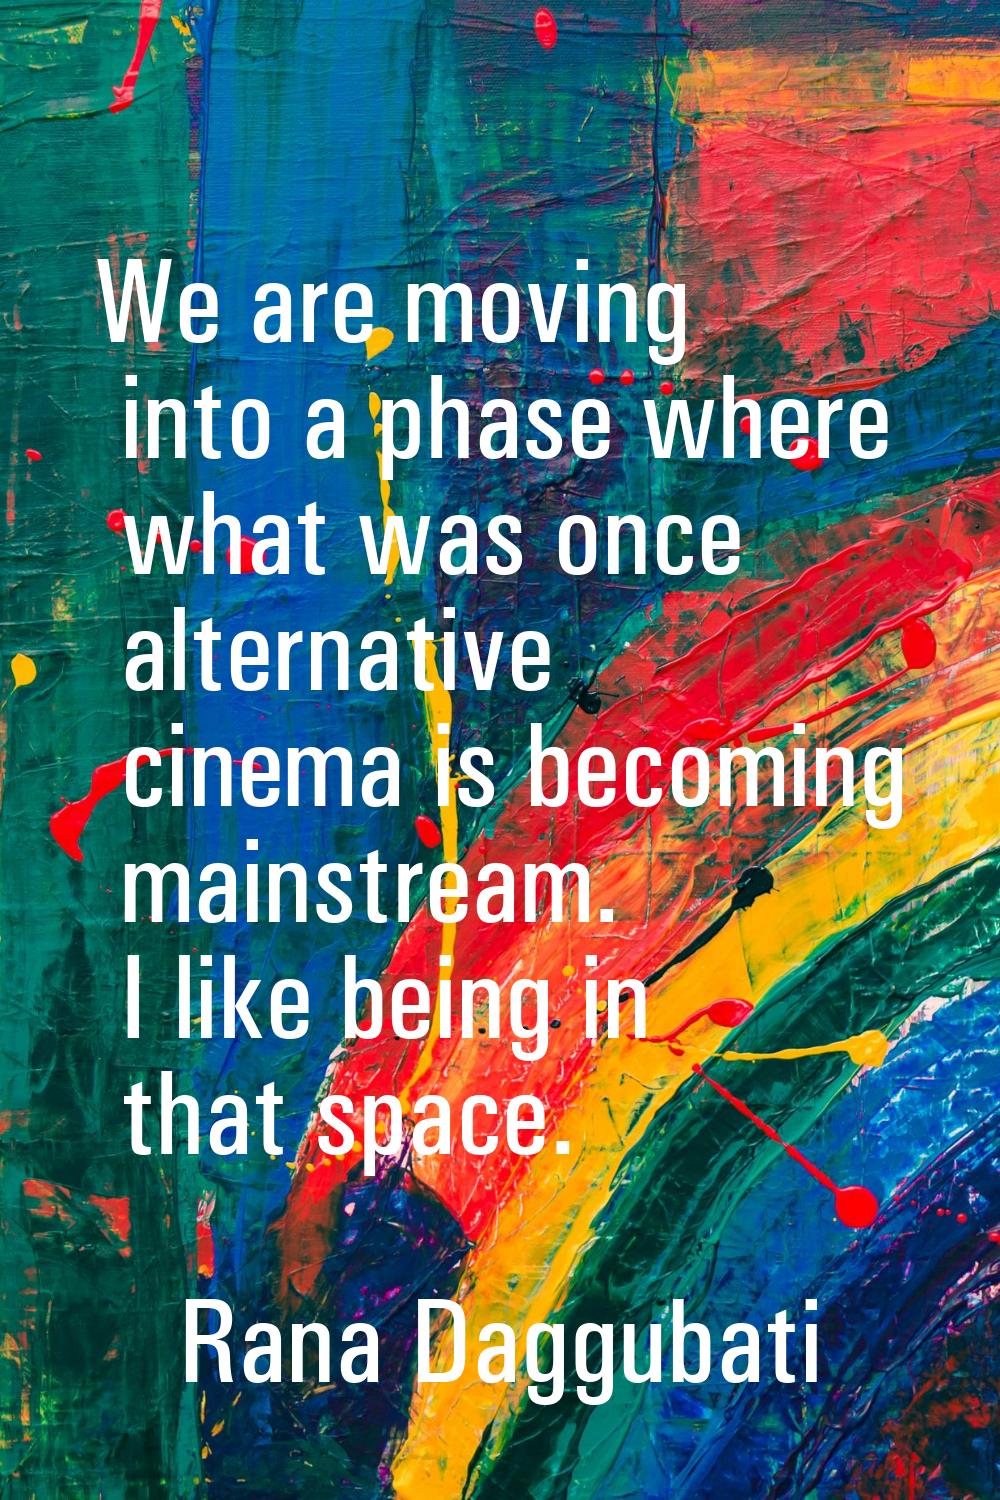 We are moving into a phase where what was once alternative cinema is becoming mainstream. I like be